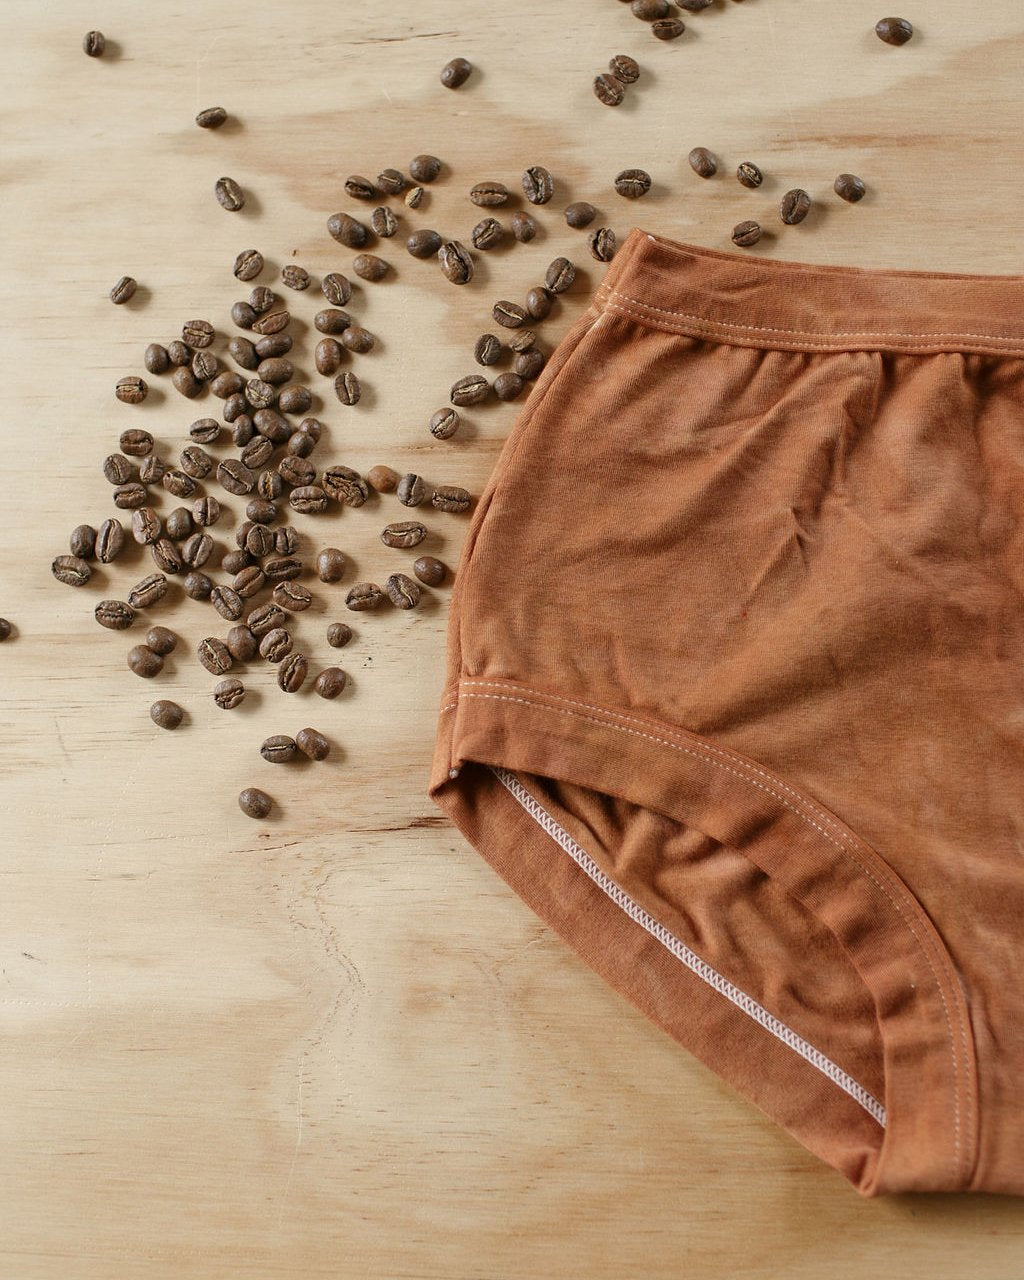 Flat lay of Thunderpants Organic Cotton Original underwear in hand dyed Shiitake color with Espresso coffee beans around.